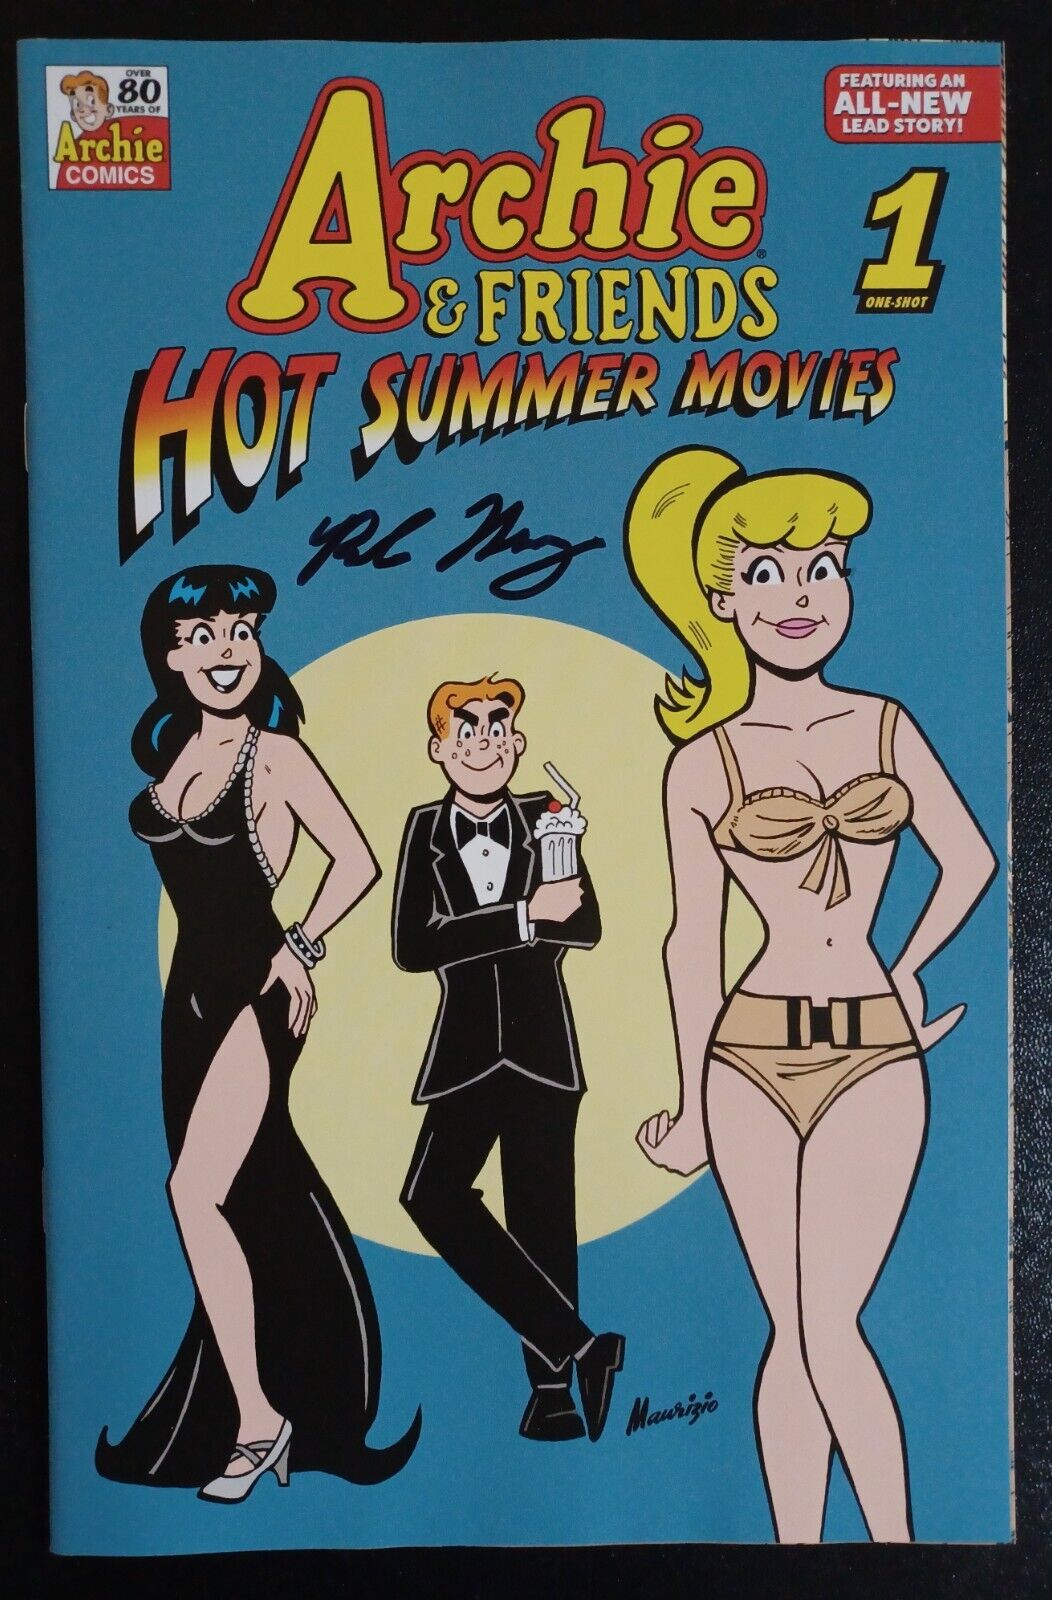 ARCHIE & FRIENDS HOT SUMMER MOVIES # 1 VARIANT JAMES BOND SIGNED